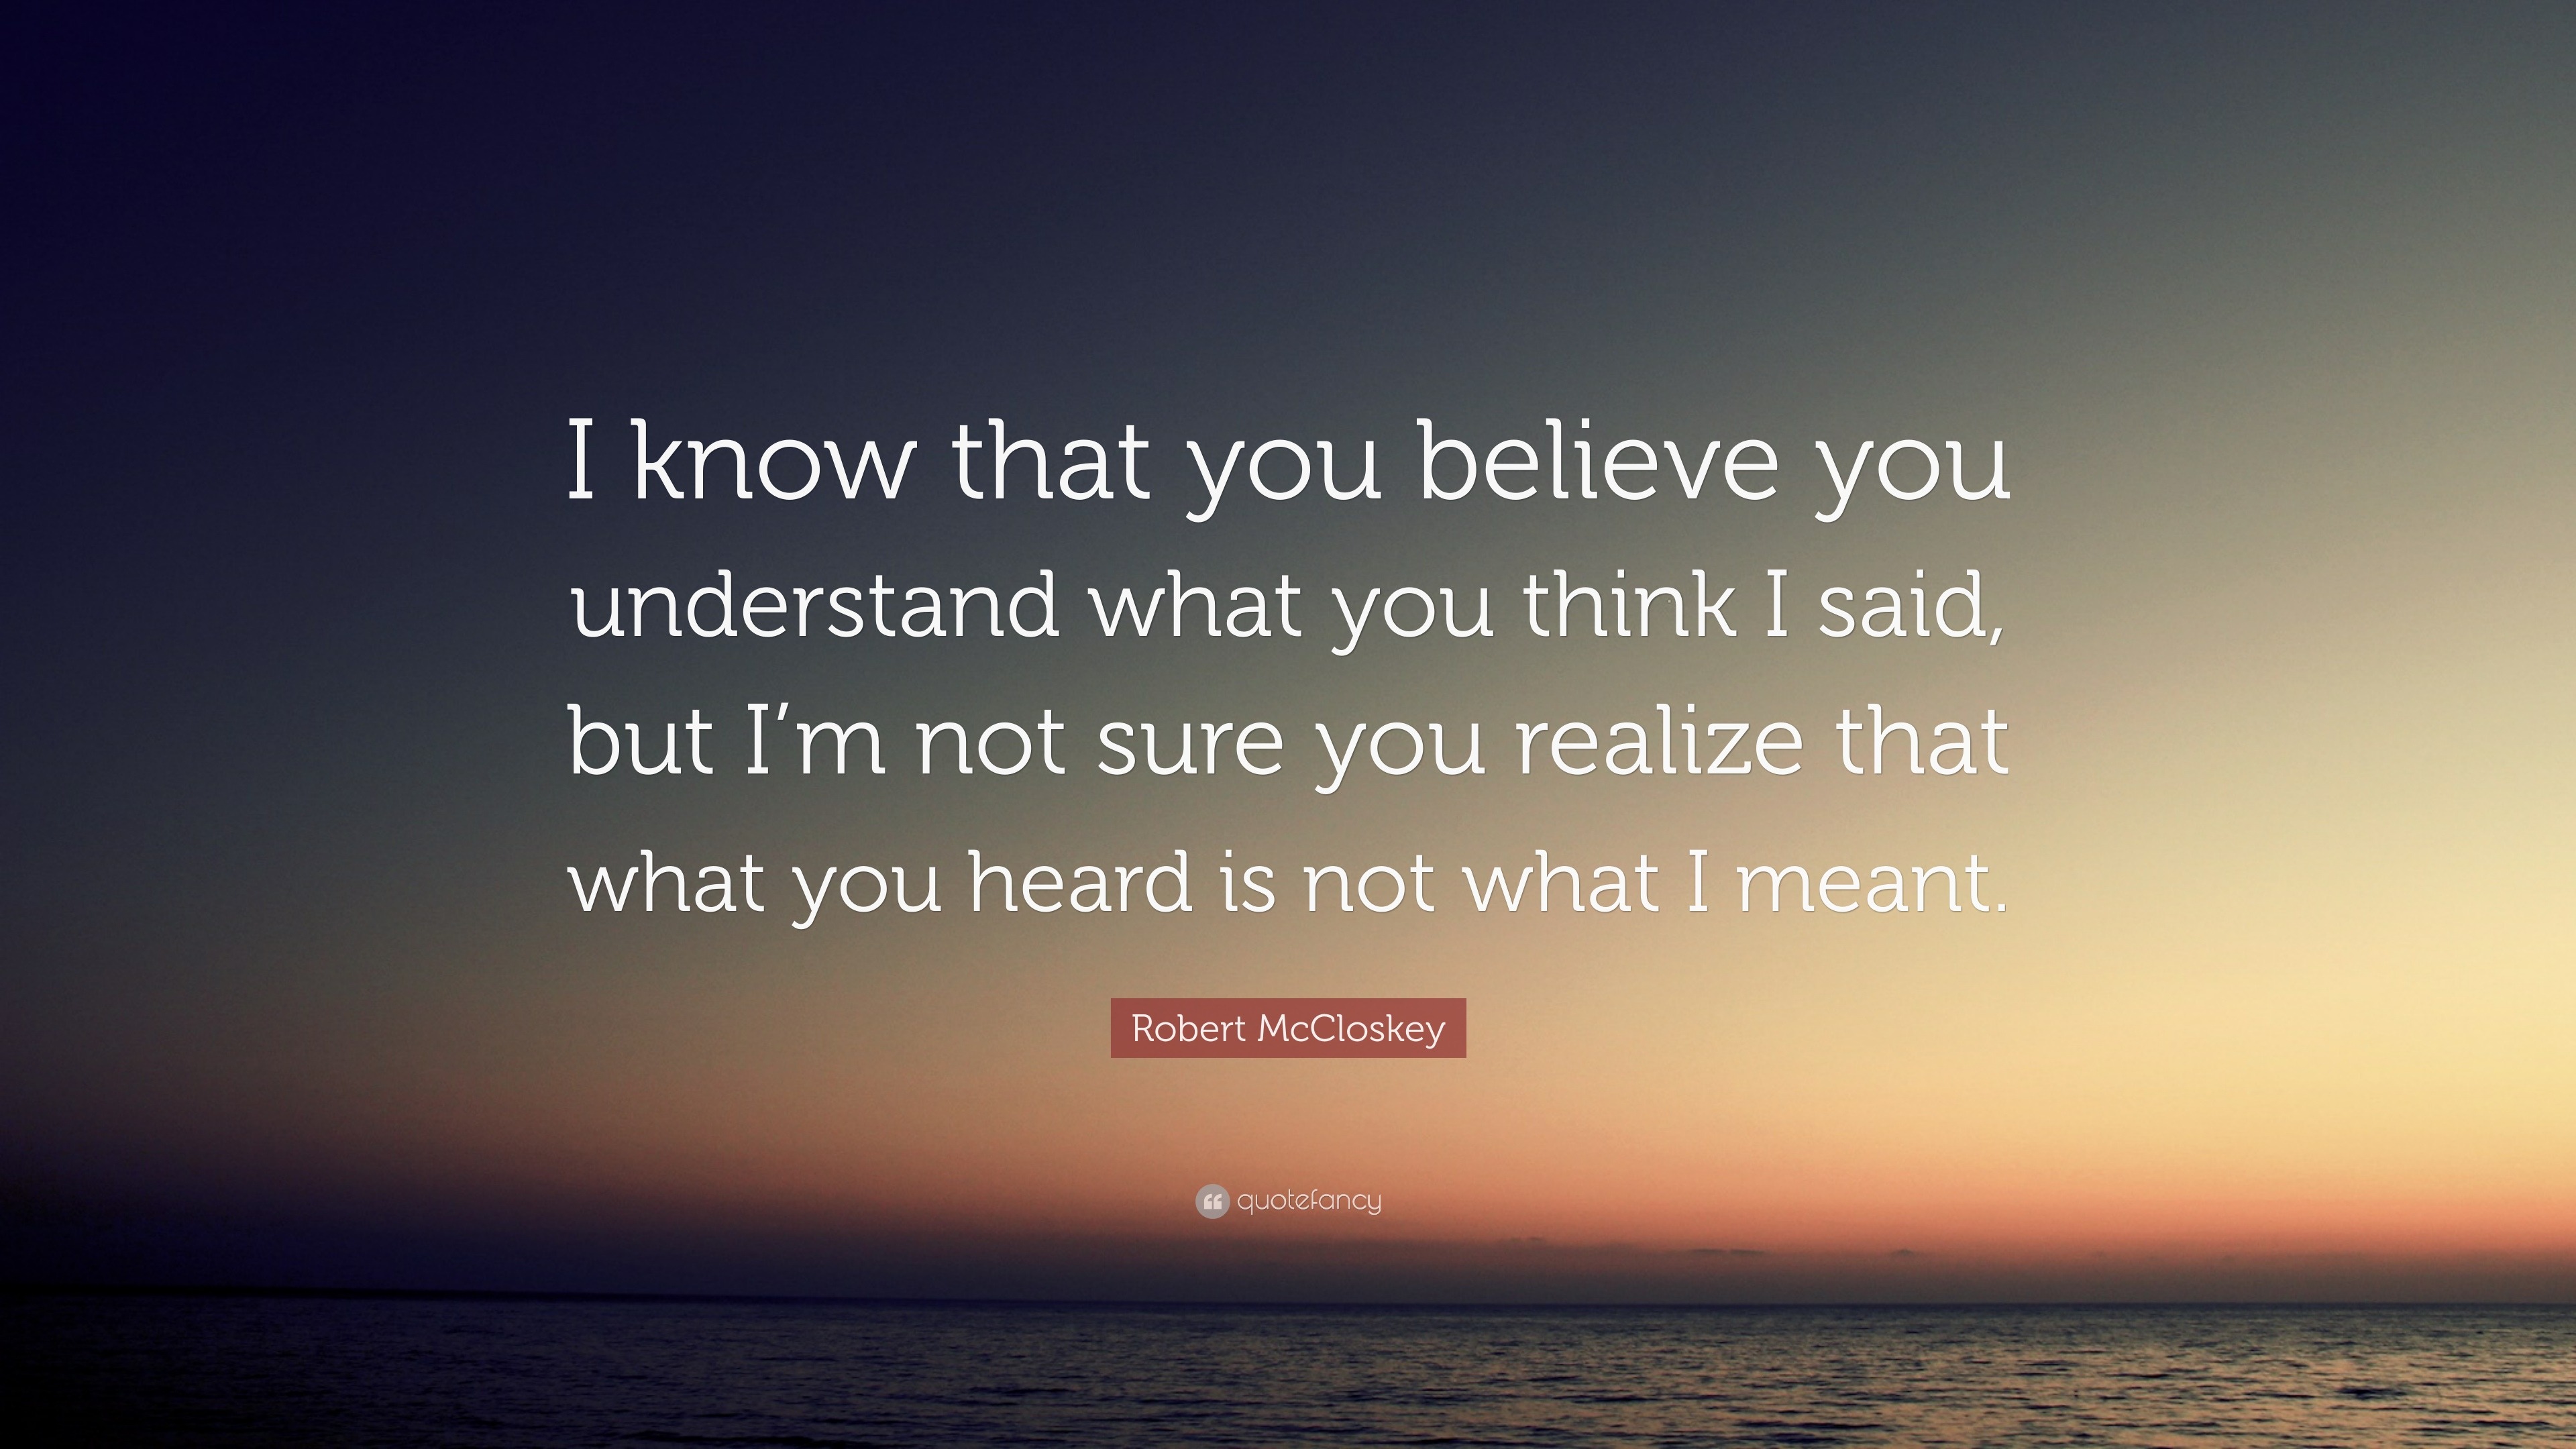 Robert McCloskey Quote: “I know that you believe you understand what